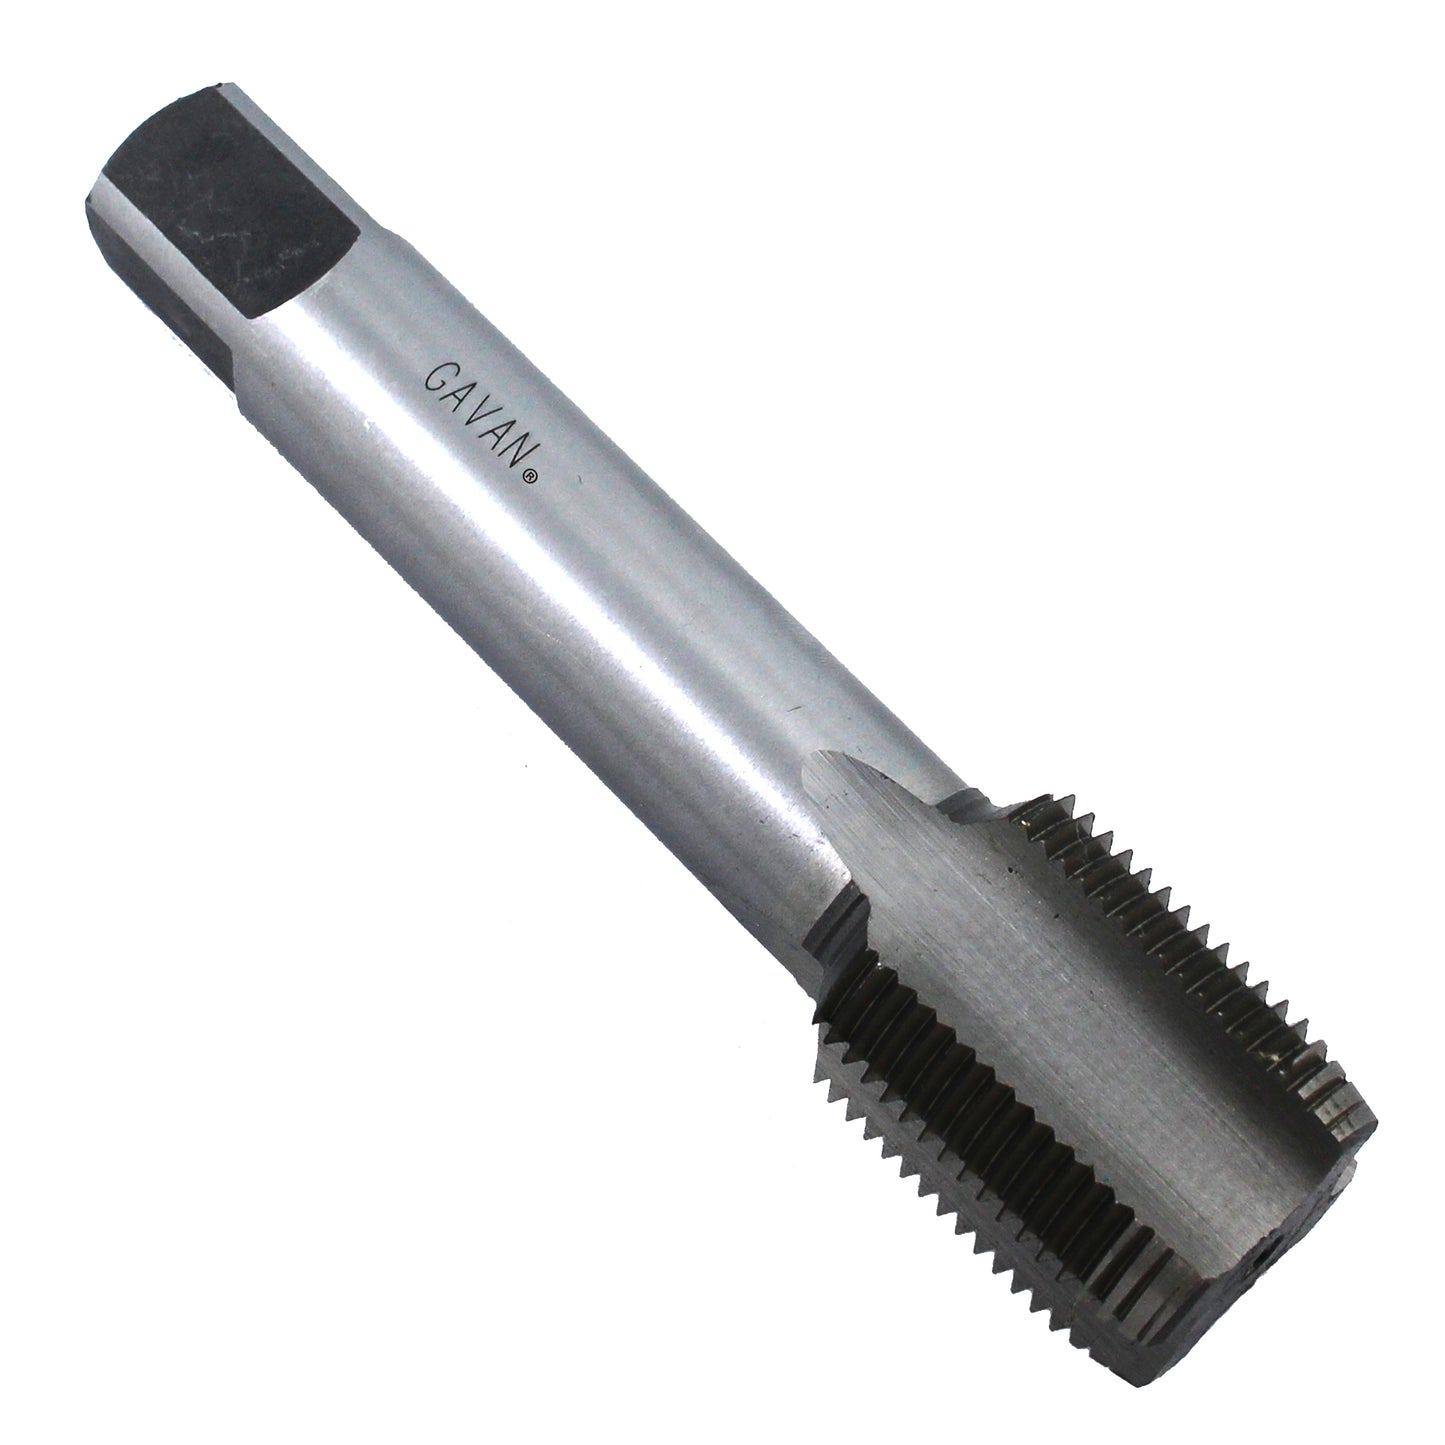 1 3/4" - 18 HSS Unified Right Hand Thread Tap